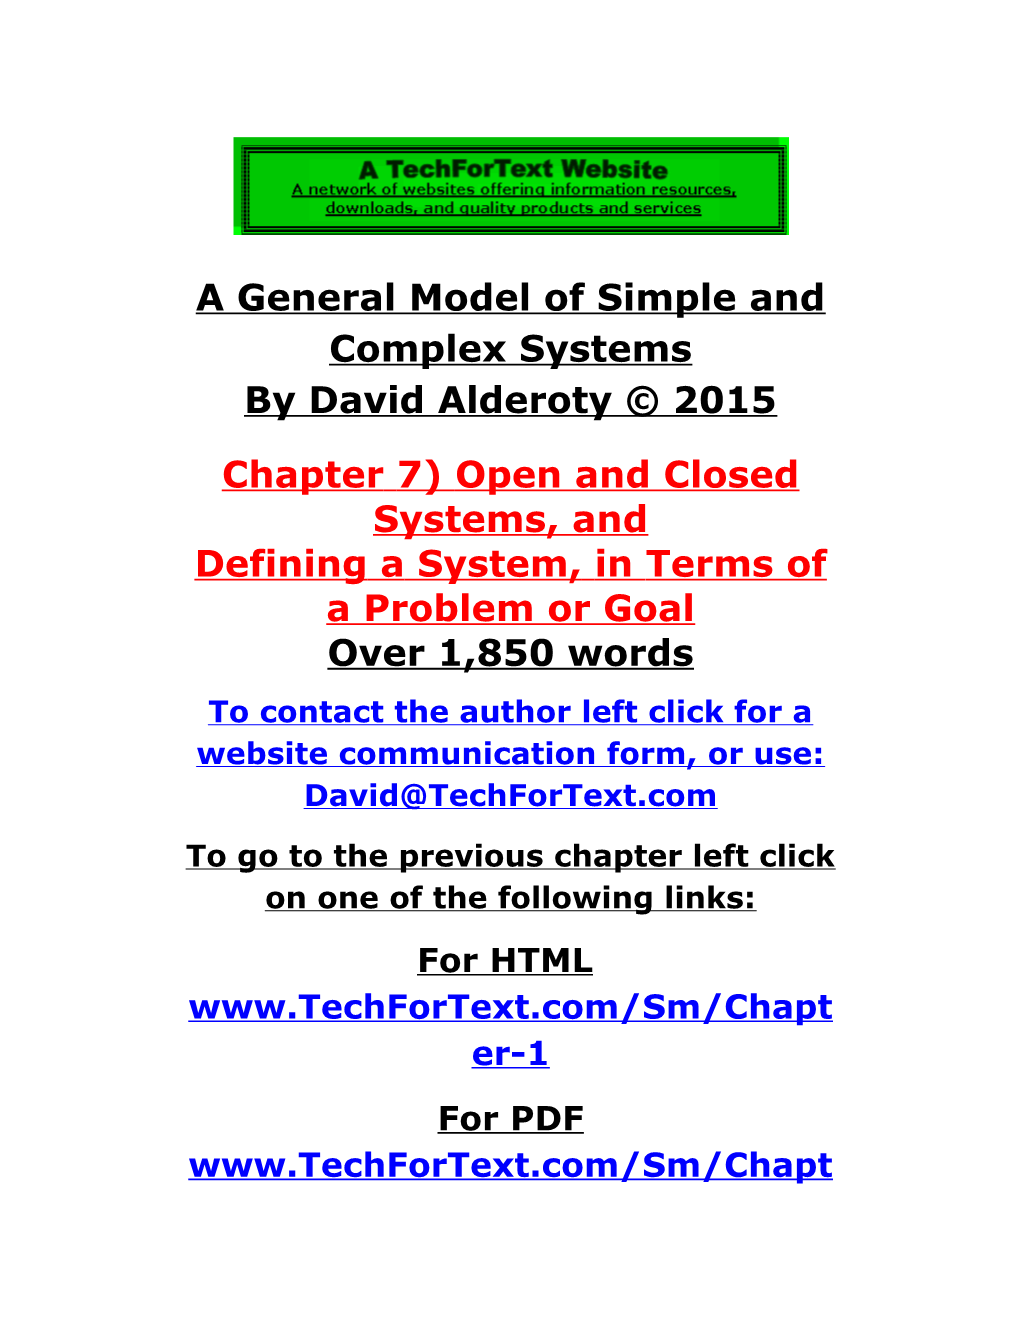 Chapter 7) Open and Closed Systems, and Defining a System, in Terms of a Problem Or Goal